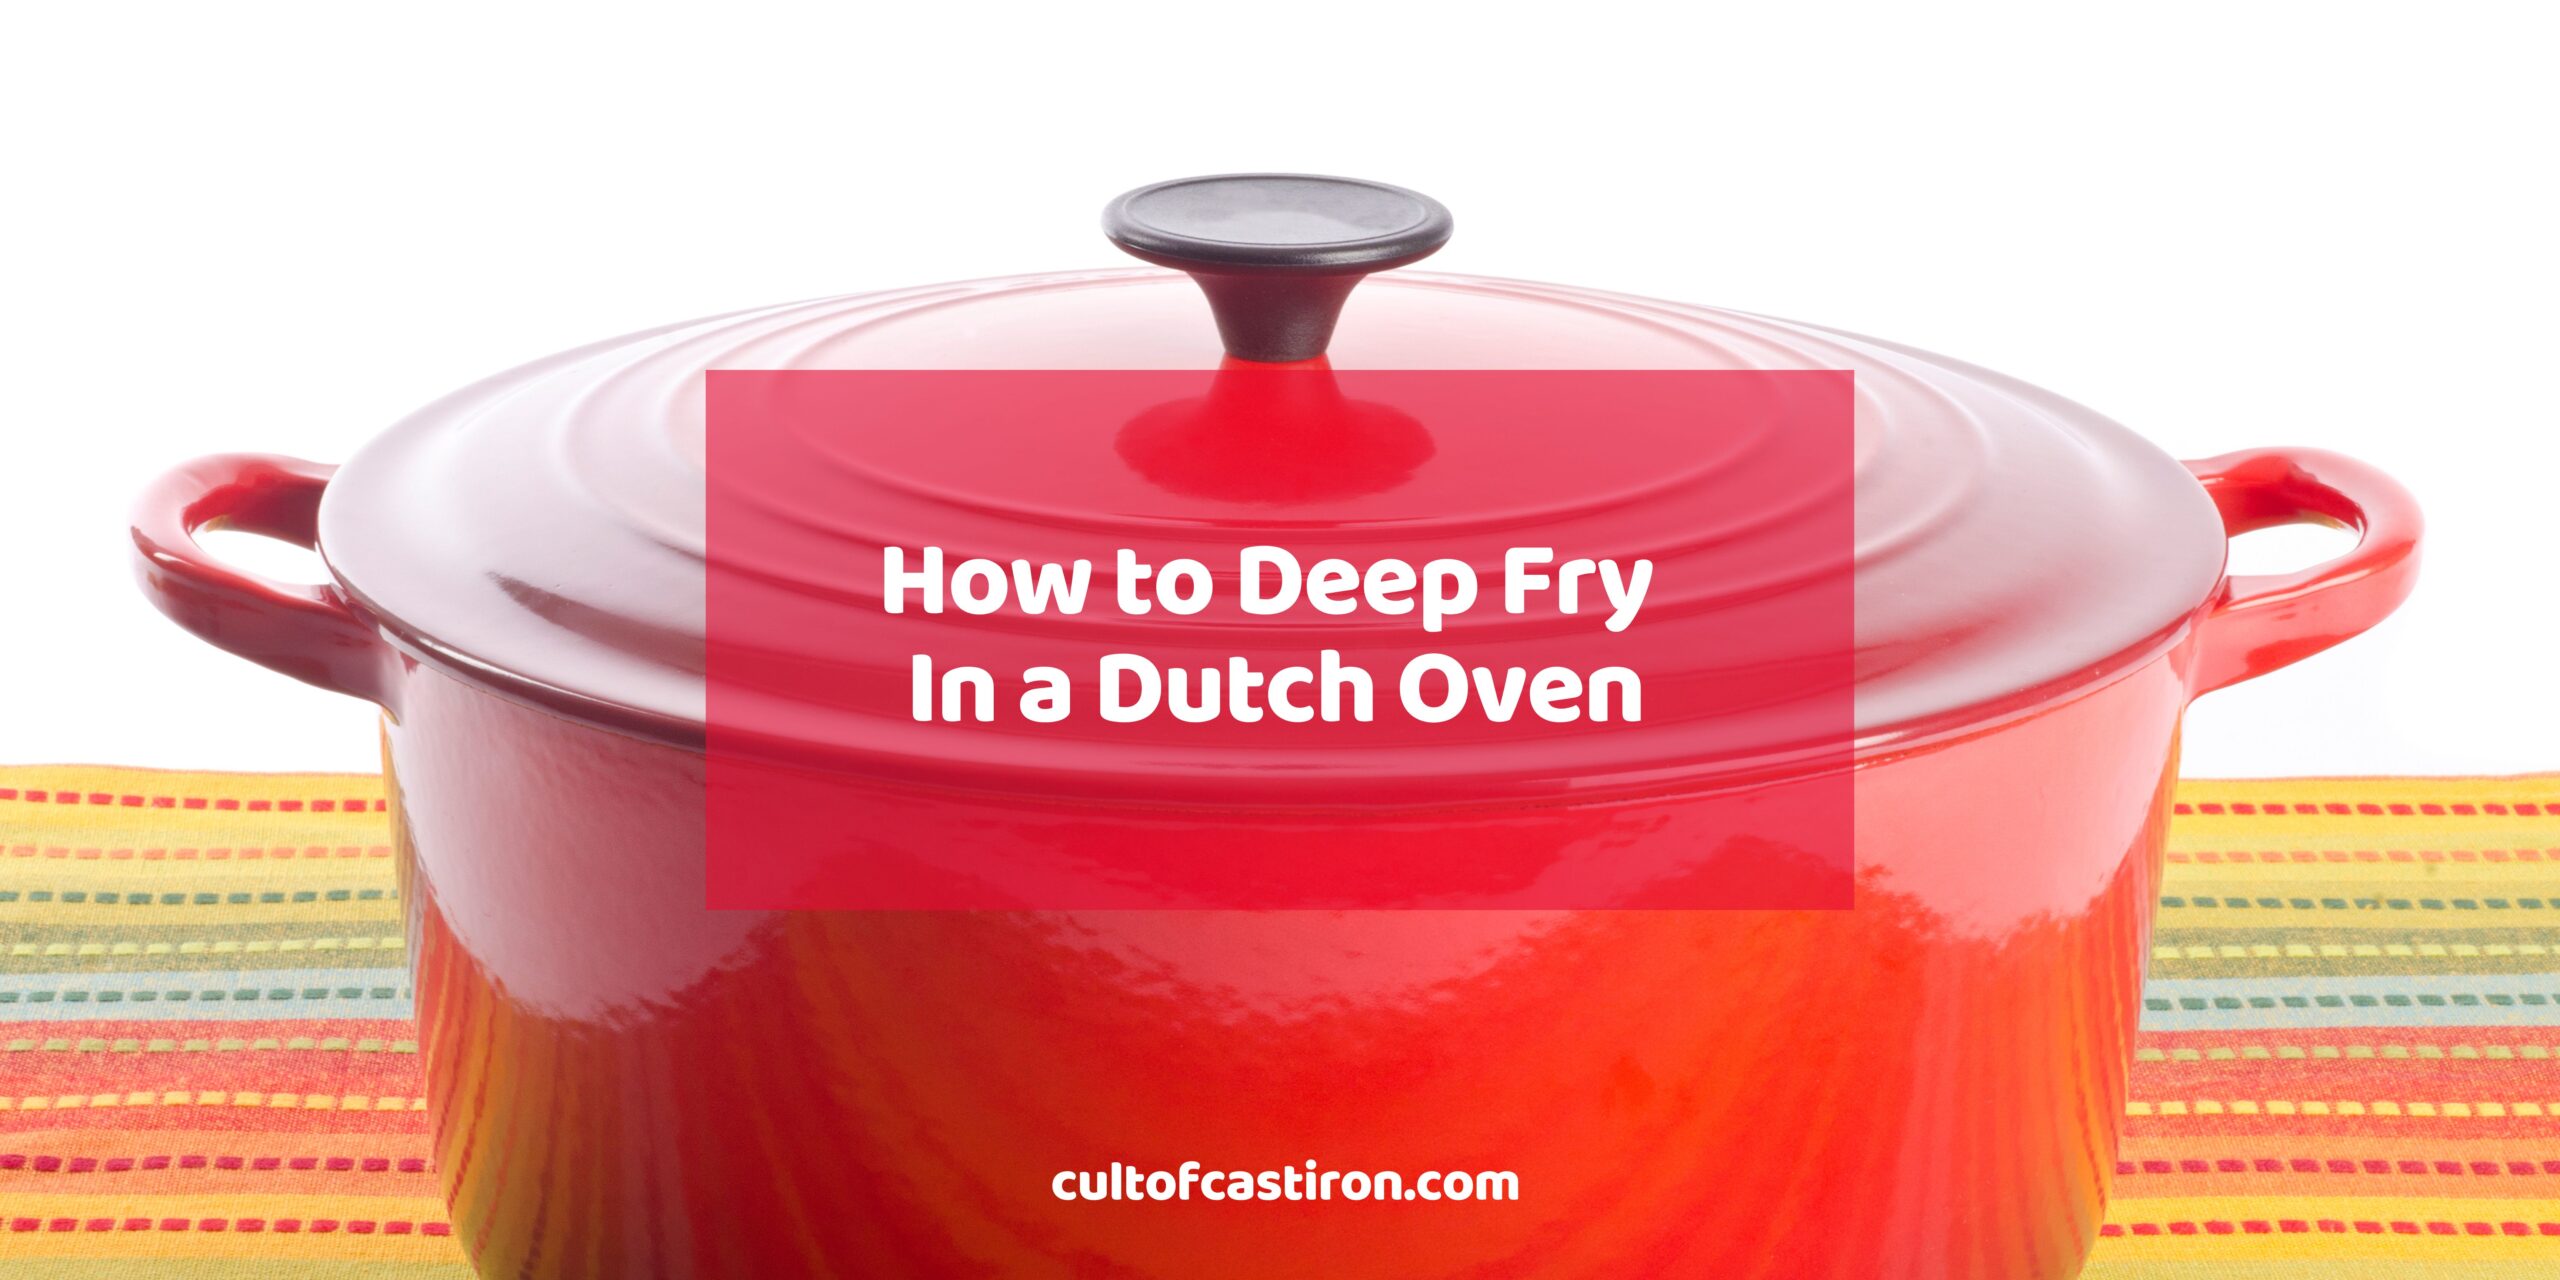 https://cultofcastiron.com/wp-content/uploads/2023/09/how-to-deep-fry-in-a-dutch-oven-scaled.jpg